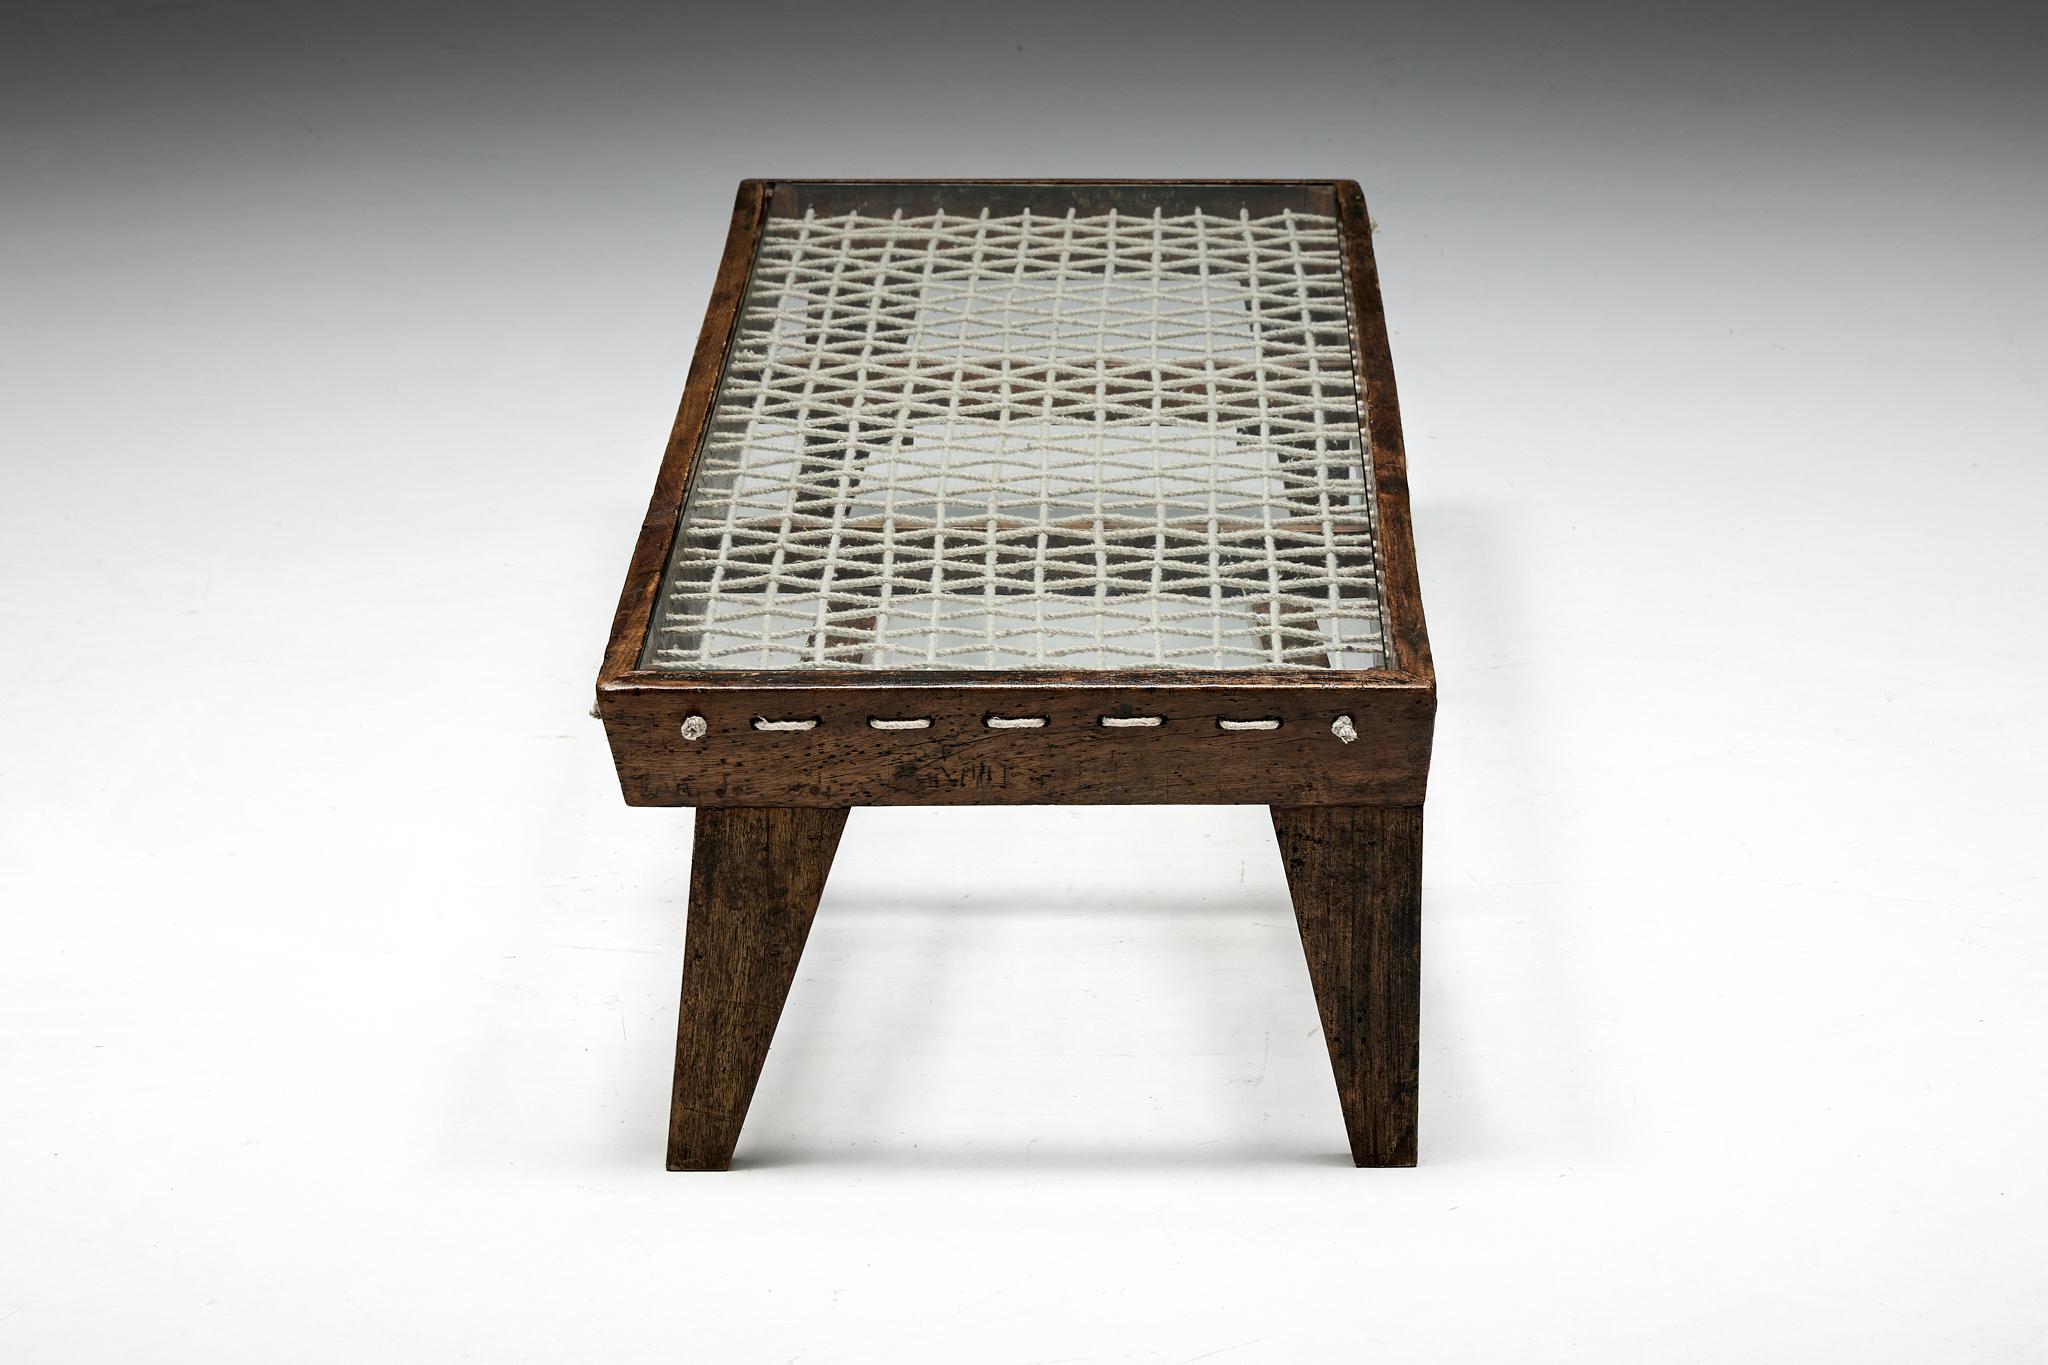 Pierre Jeanneret; India; Chandigarh; Teak; Coffee Table; Lounge Table; 1960s; PJ-TB-05-B; Le Corbusier; Charlotte Perriand; Braided Rope; Rare;

Rare rectangular coffee table by Pierre Jeanneret. Its distinctive design features four spindle feet